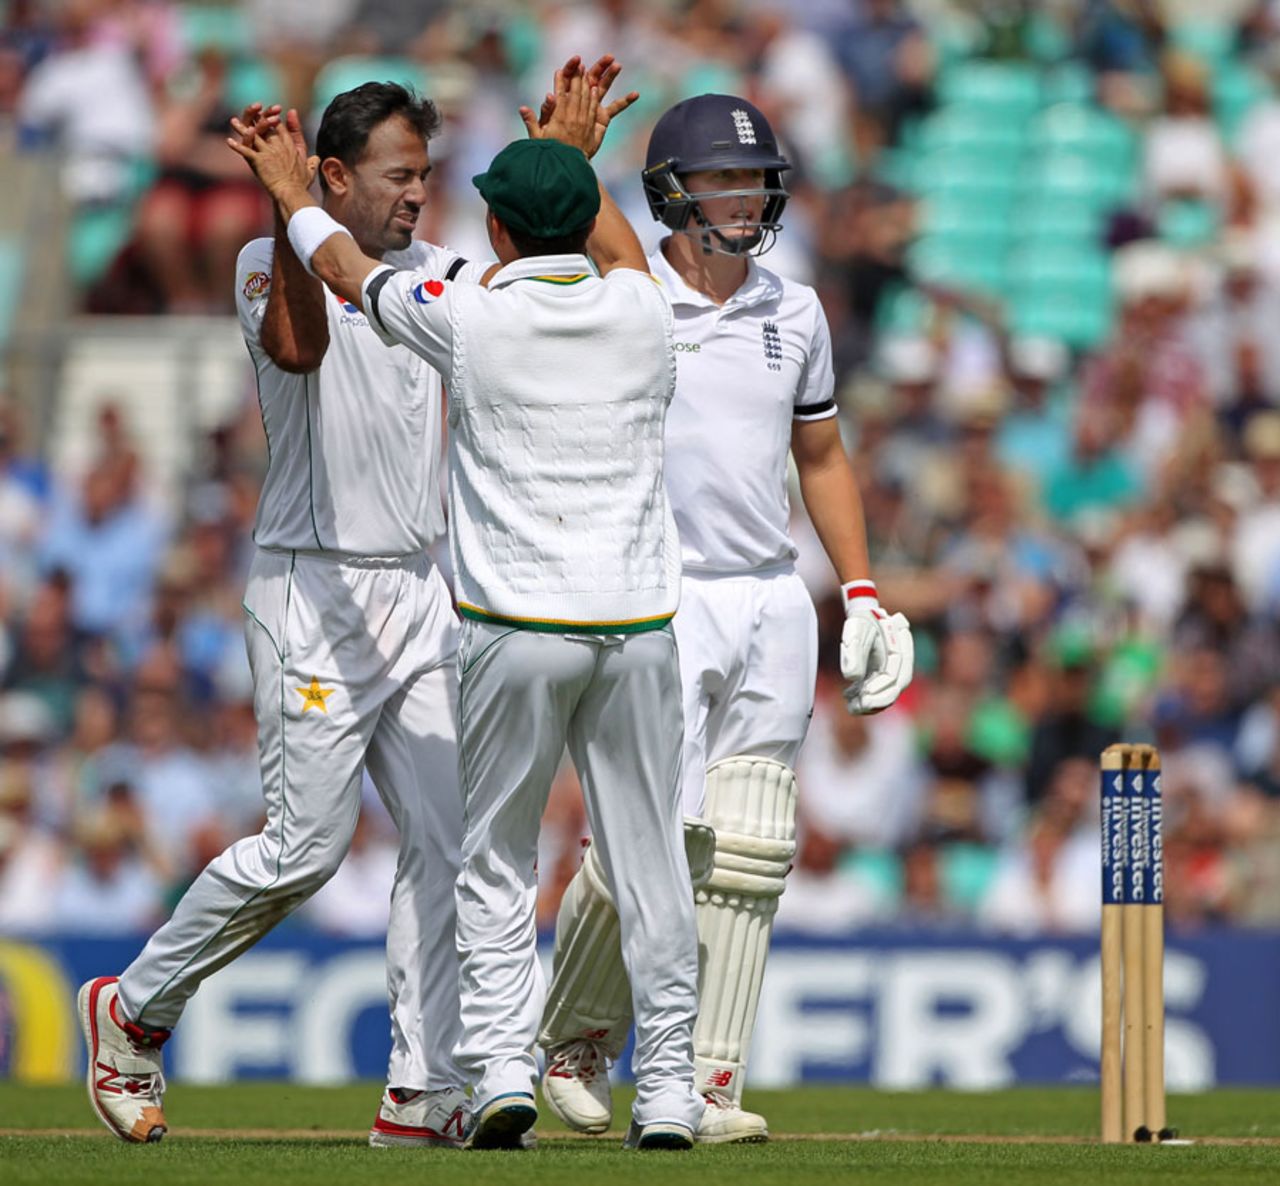 Wahab Riaz had Gary Ballance taken at slip, England v Pakistan, 4th Test, The Oval, 1st day, August 11, 2016